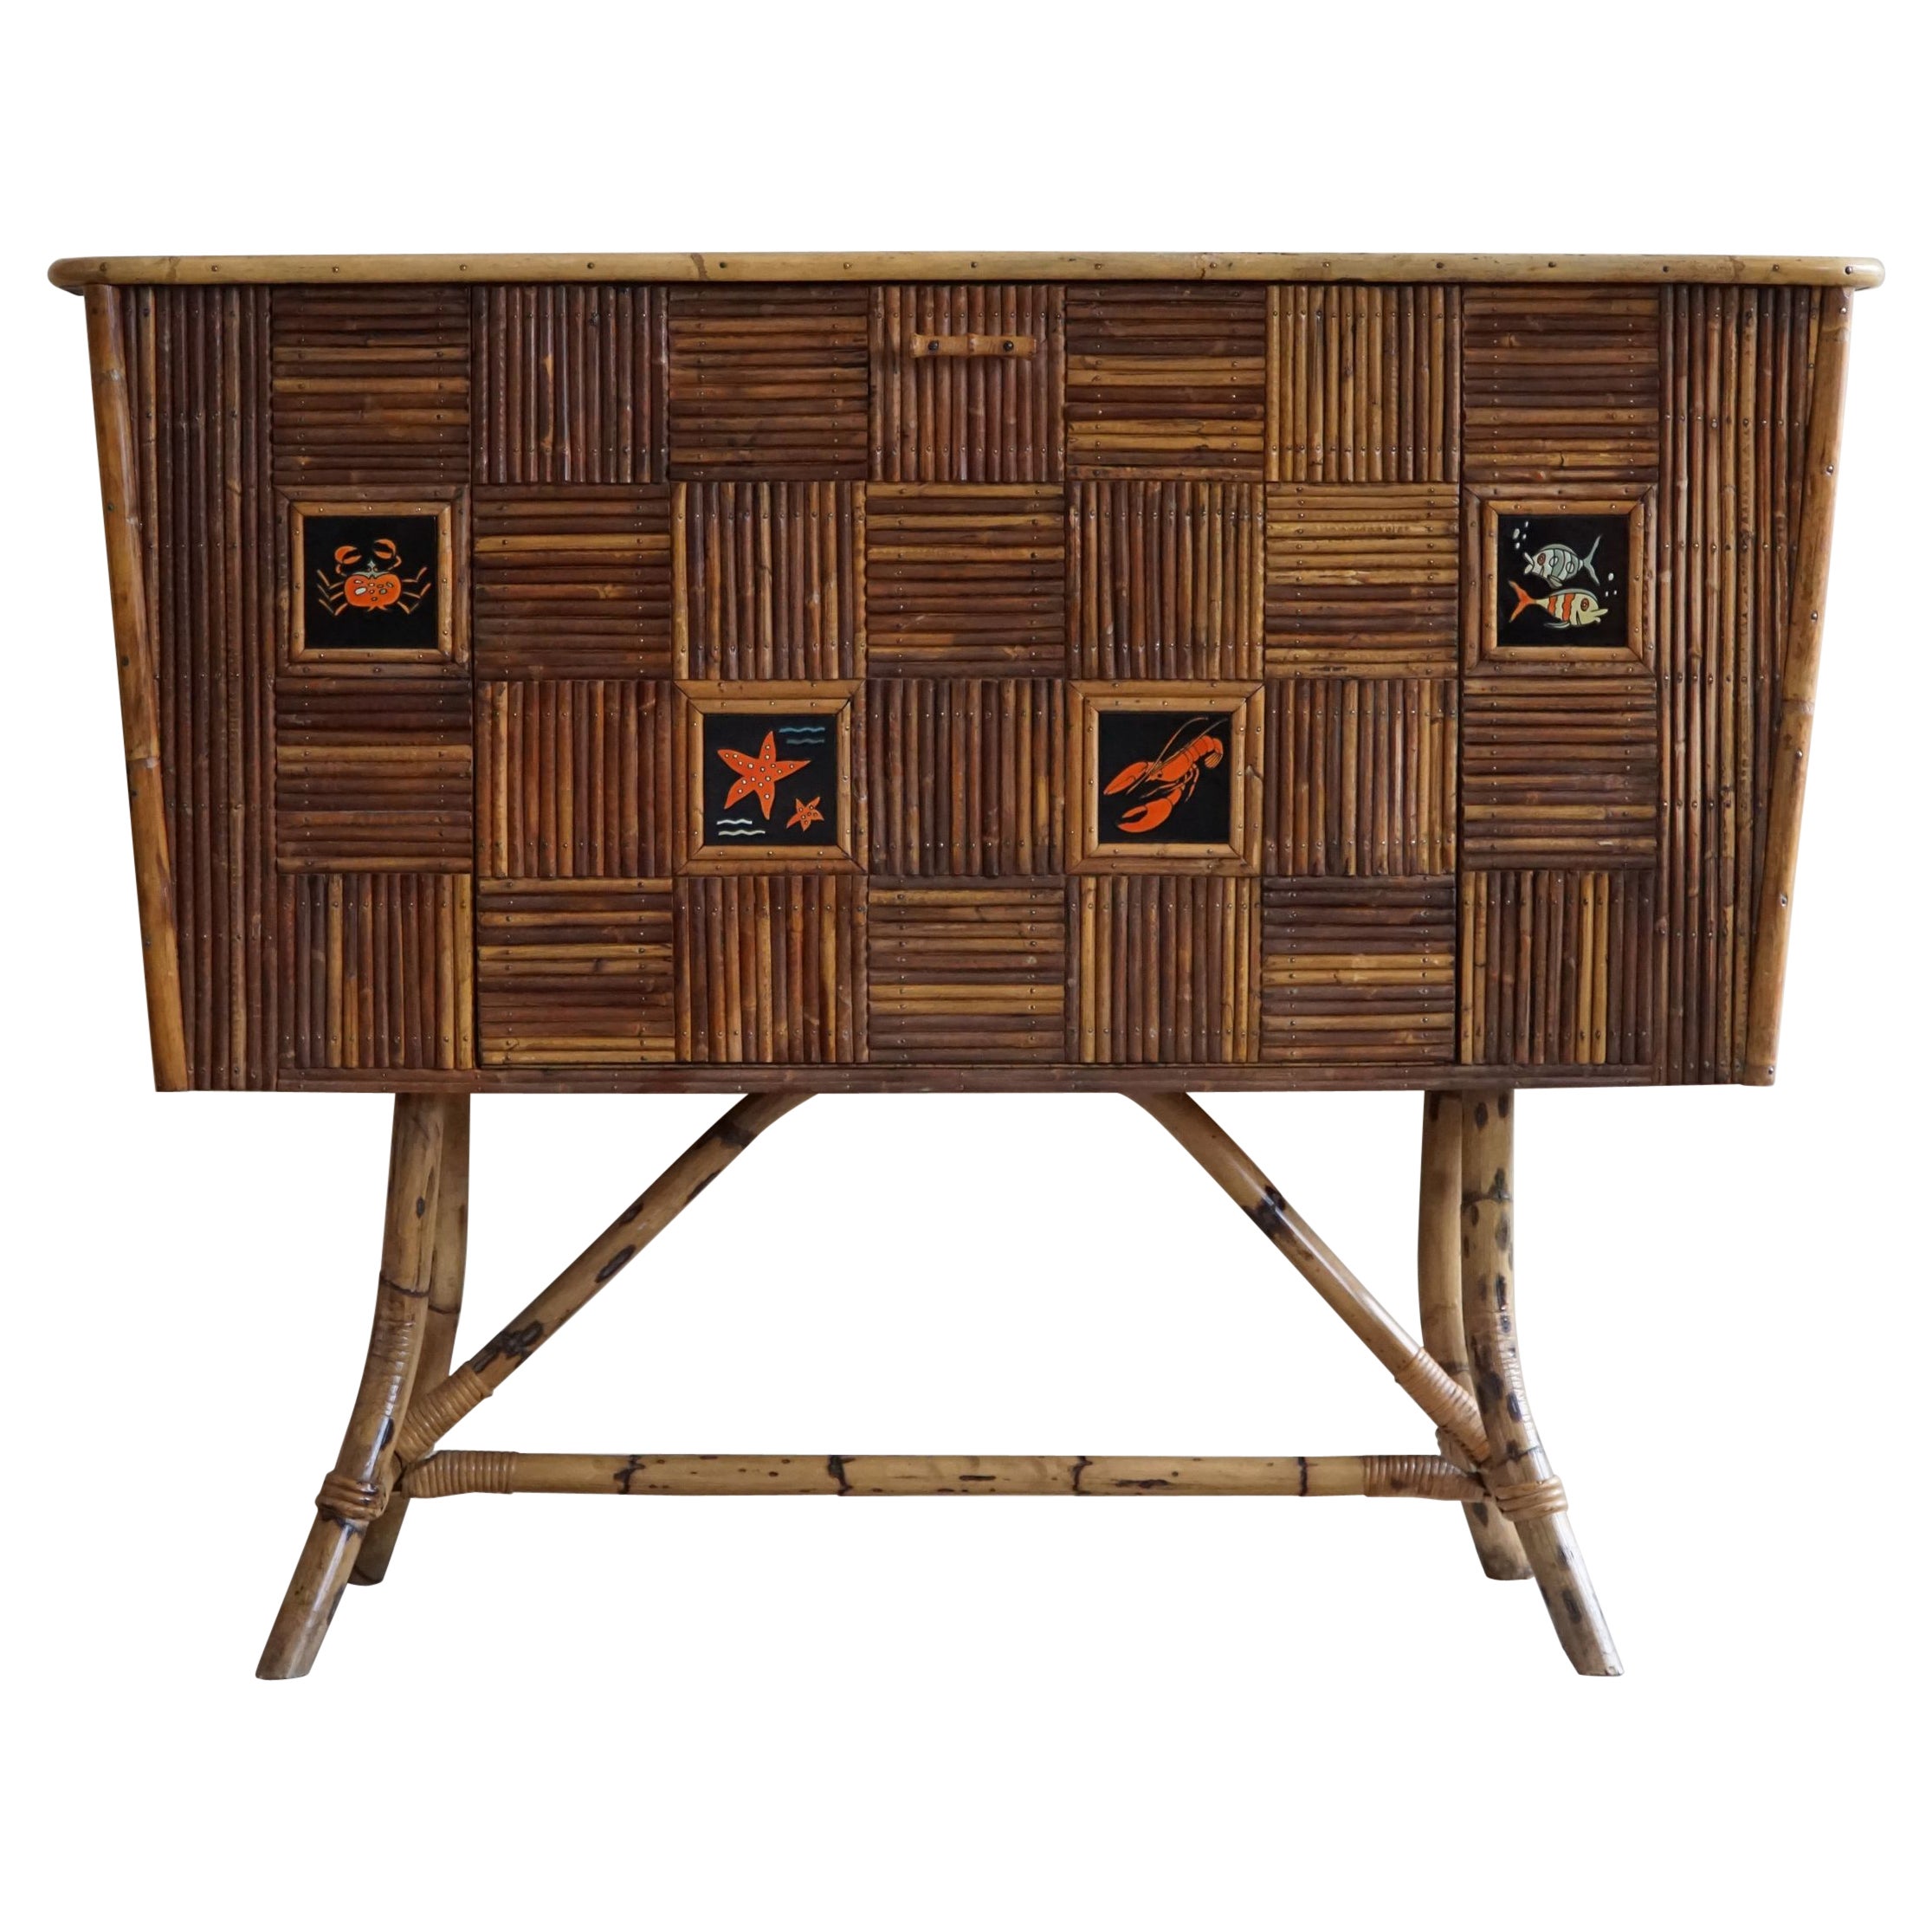 20th Century Rattan Cabinet Attributed to Audoux & Minet, Made in France